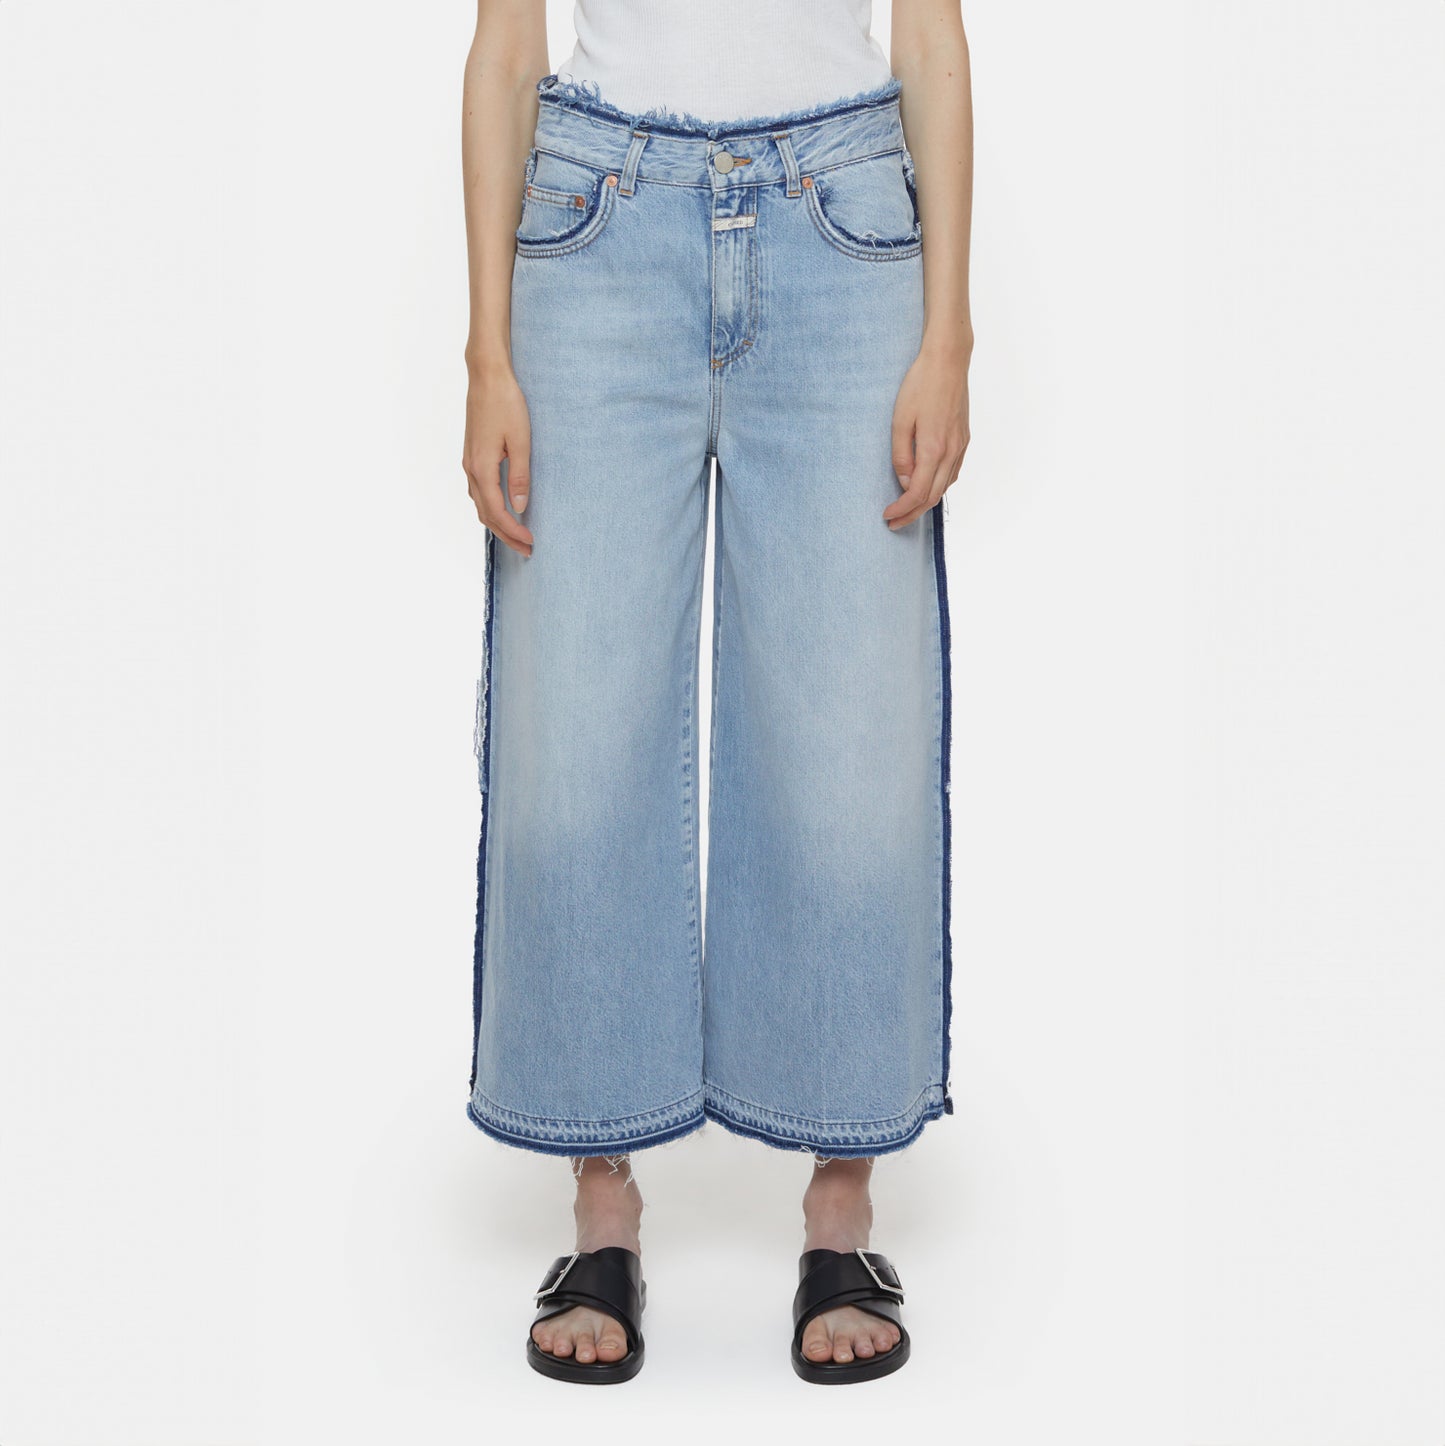 Lyna Relaxed Jean in Light Blue